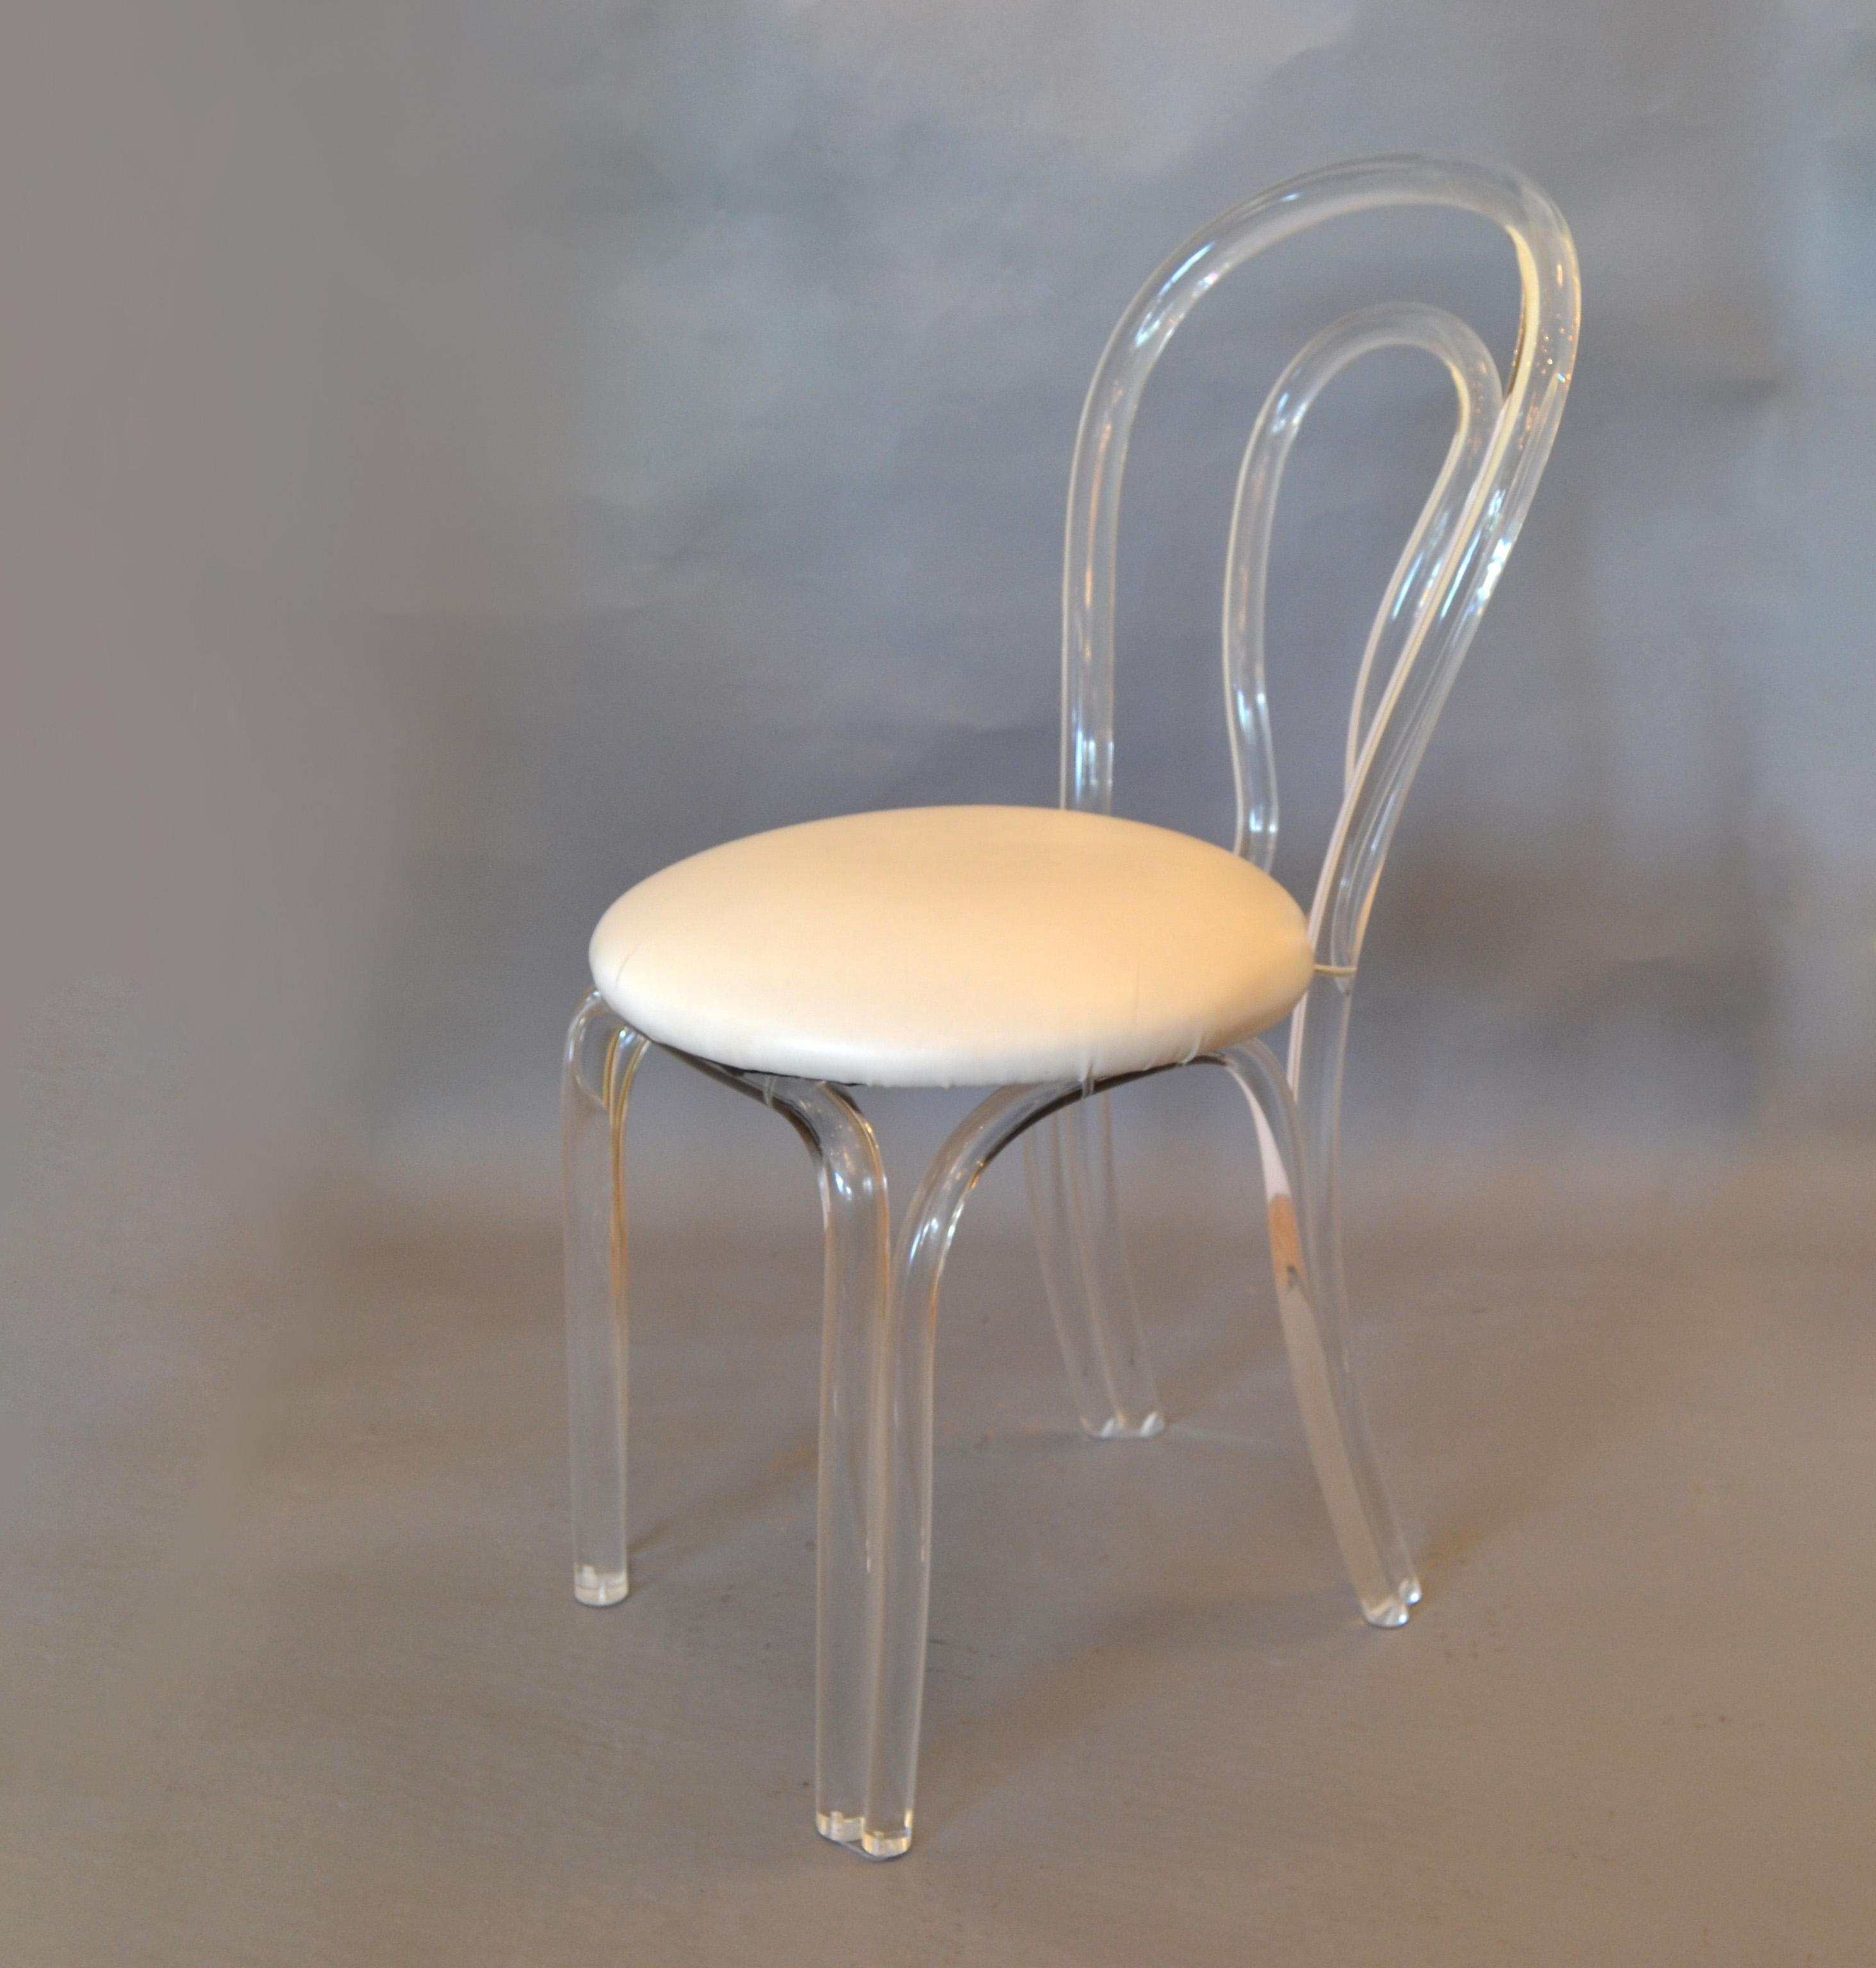 Mid-Century Modern sculptural Lucite chair in vinyl upholstery.
The chair has a very unique backrest and base.
Makers Mark underneath the seat.
Can be used as a desk chair or a vanity chair.